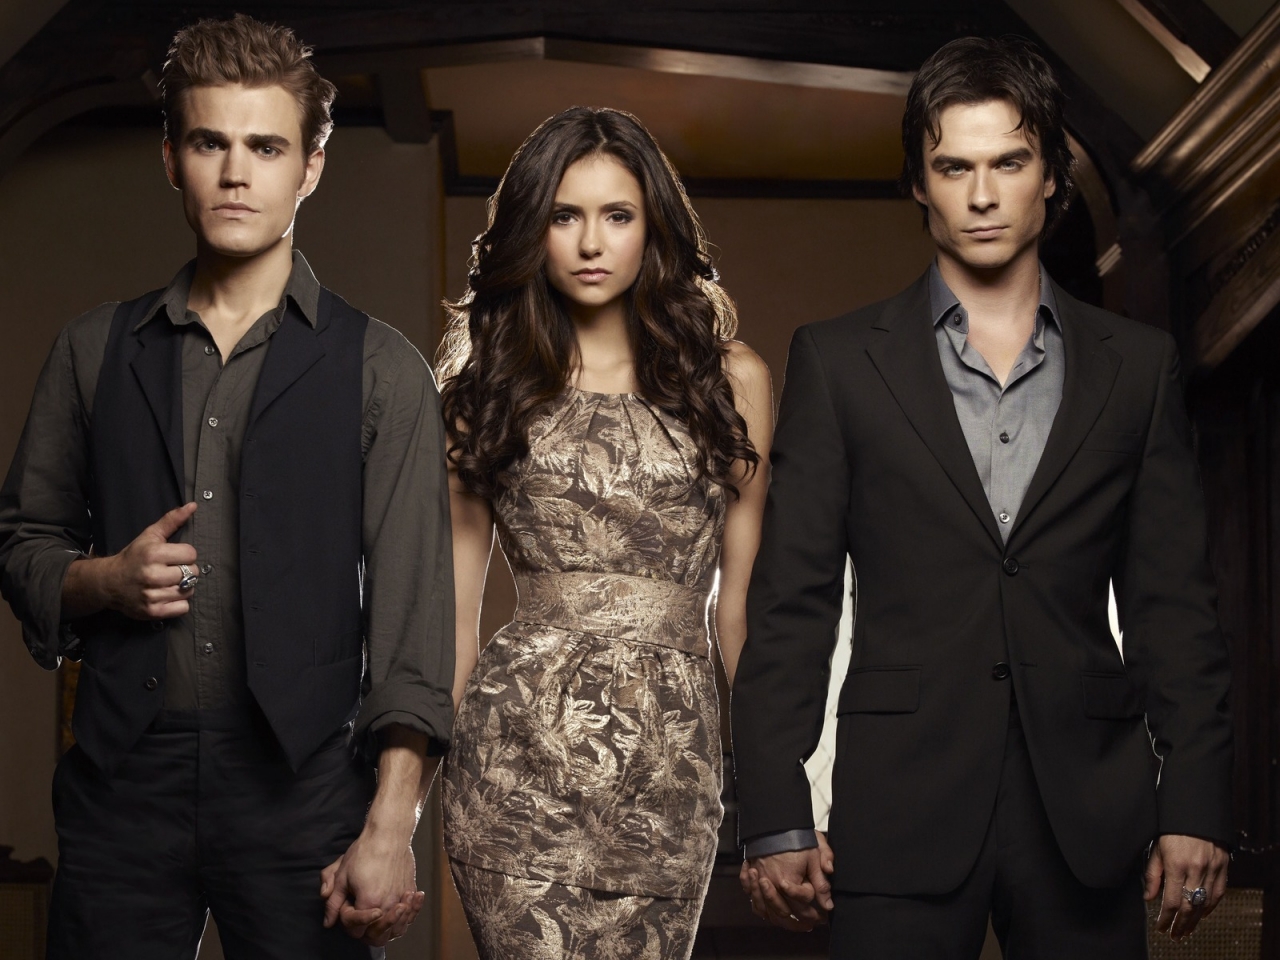 The Vampire Diaries Pics for 1280 x 960 resolution